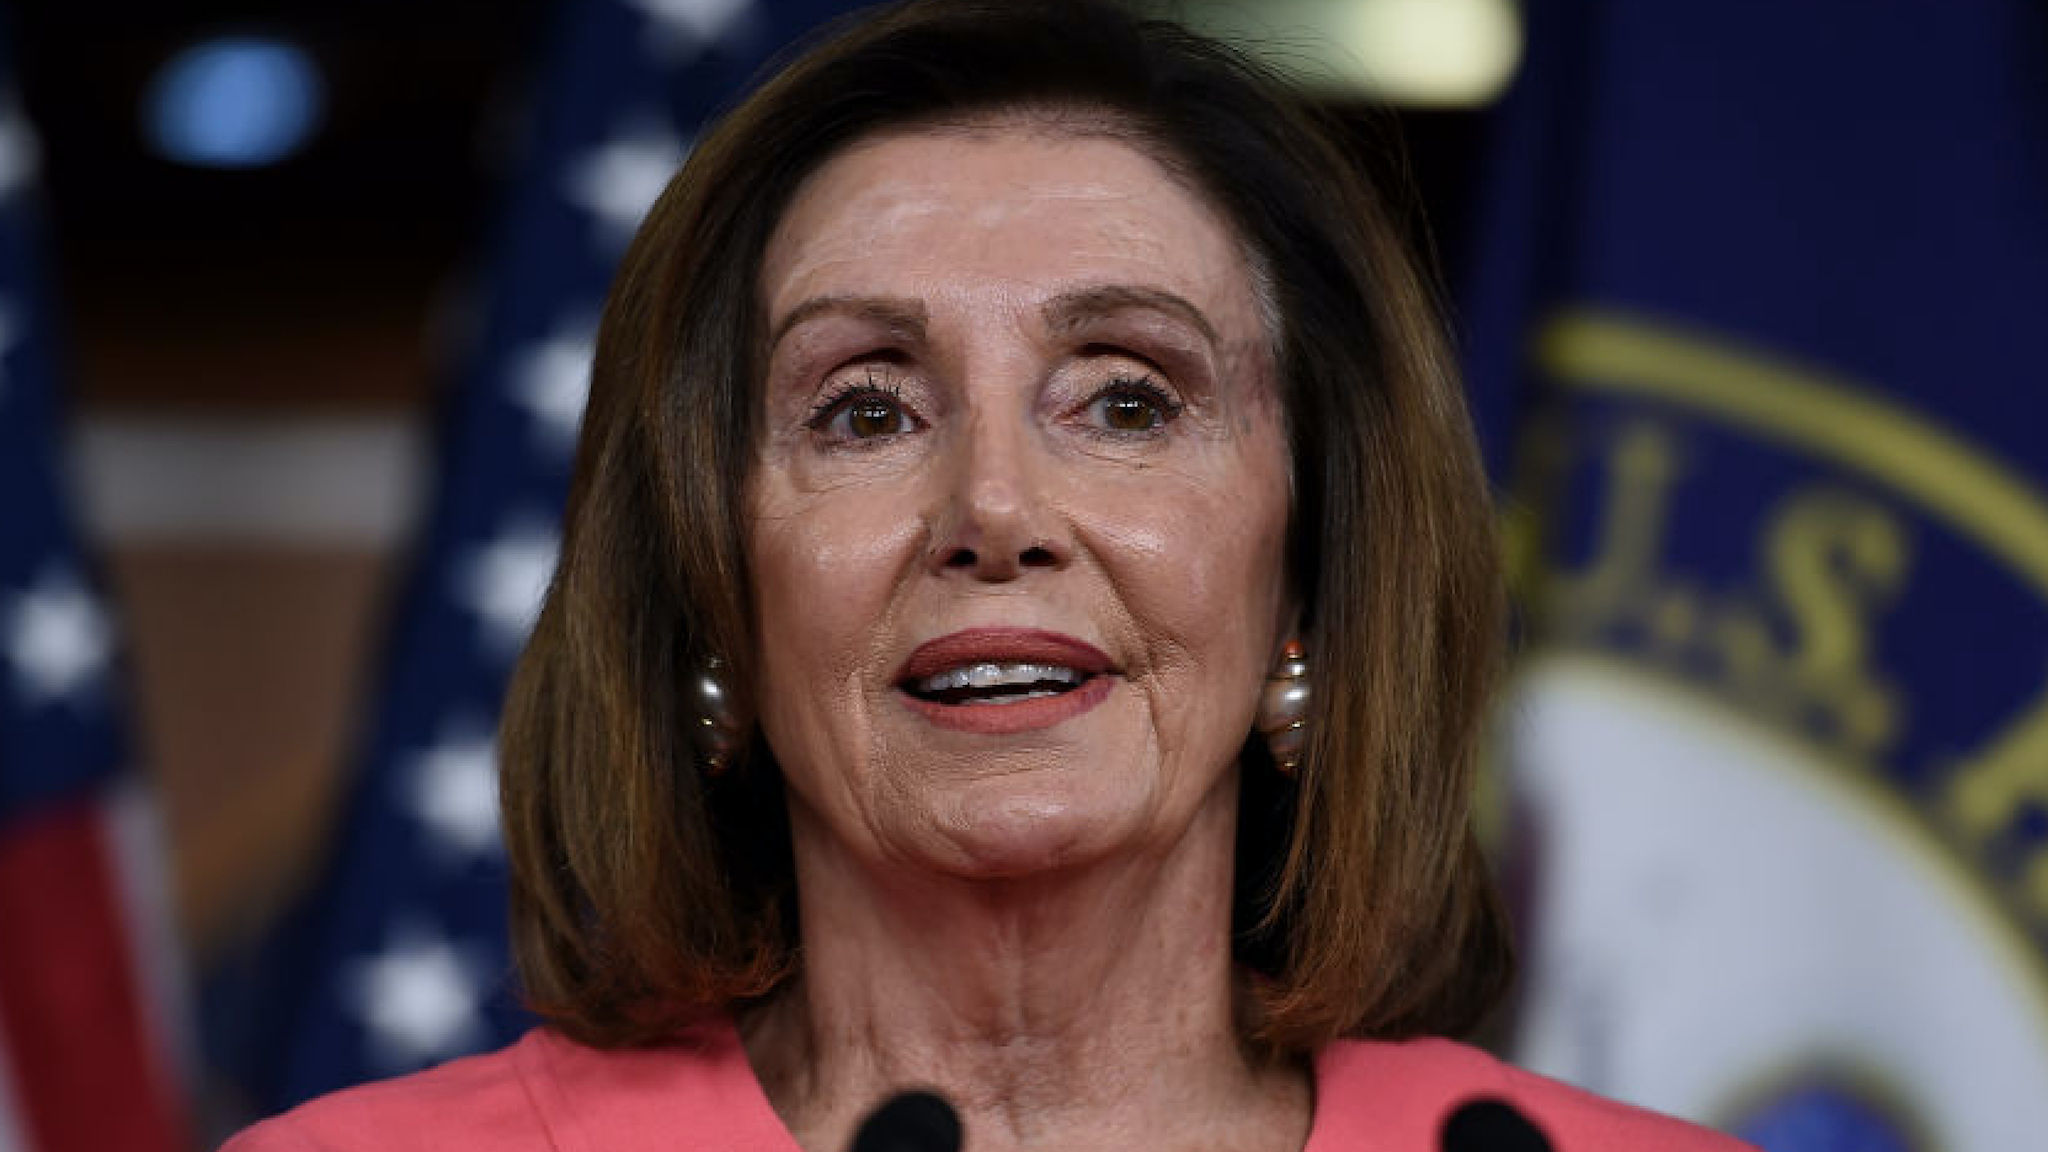 US Speaker of the House Nancy Pelosi (D-CA) speaks at a press conference to announce the impeachment managers on Capitol Hill January 15, 2020, in Washington, DC.